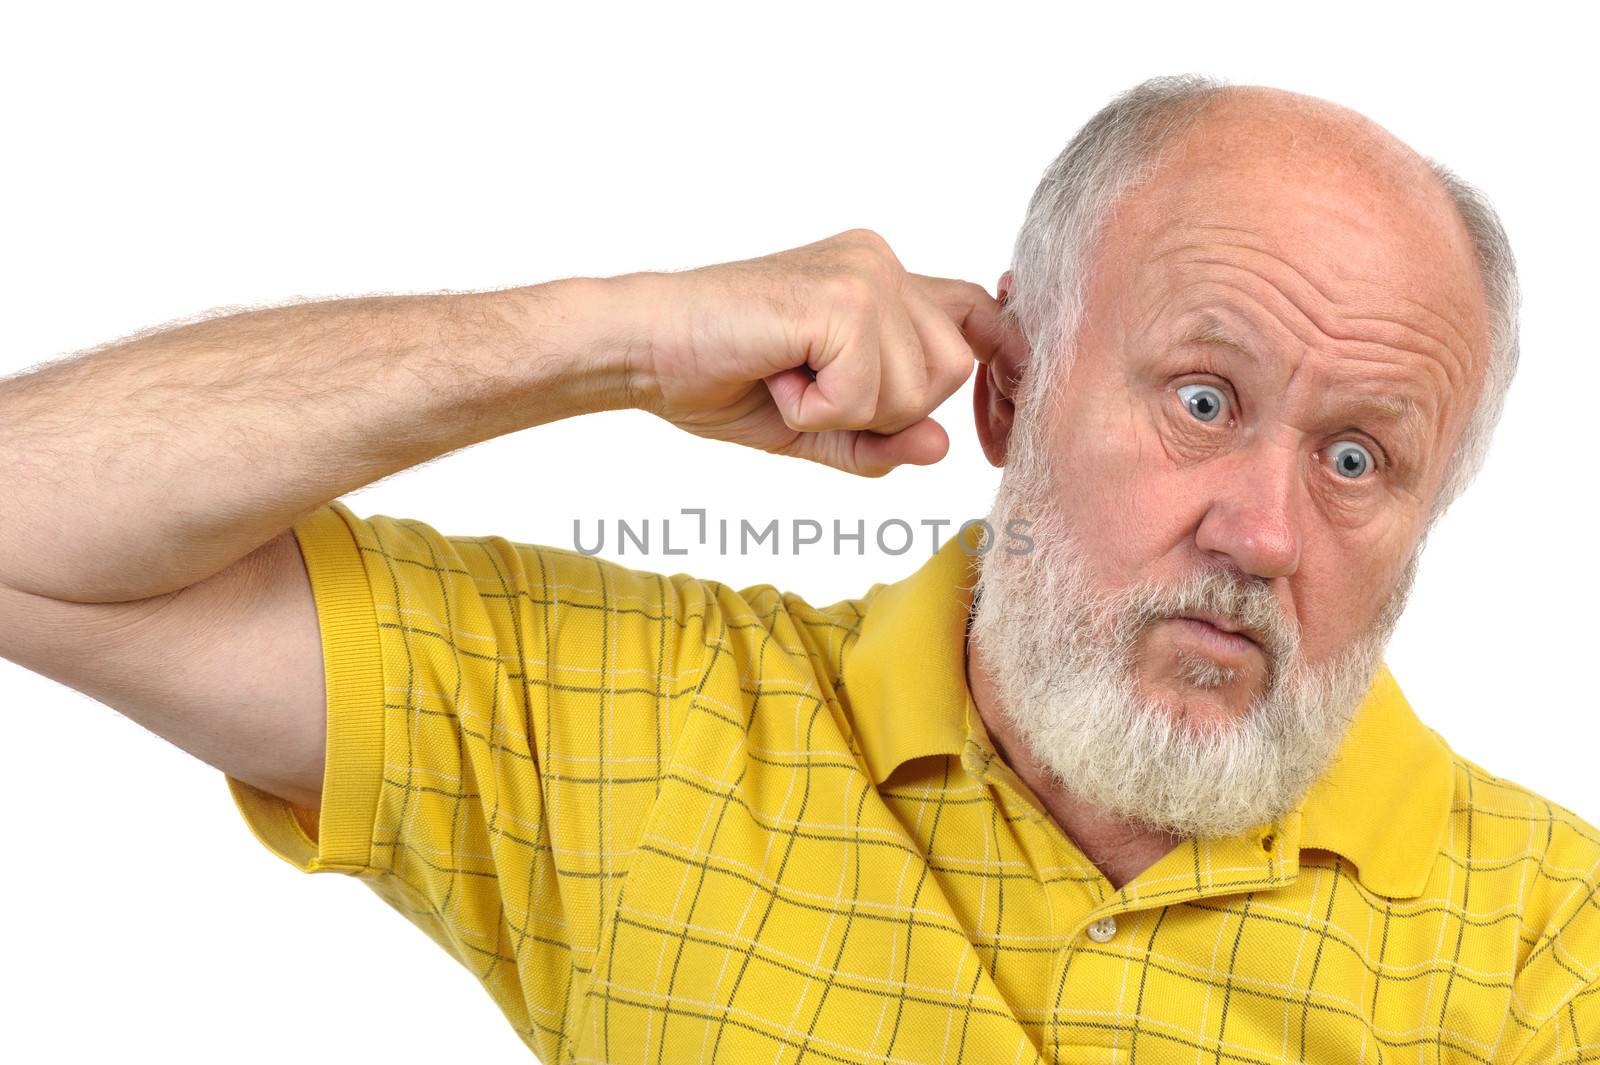 goofy bald senior man picking his ear with index finger